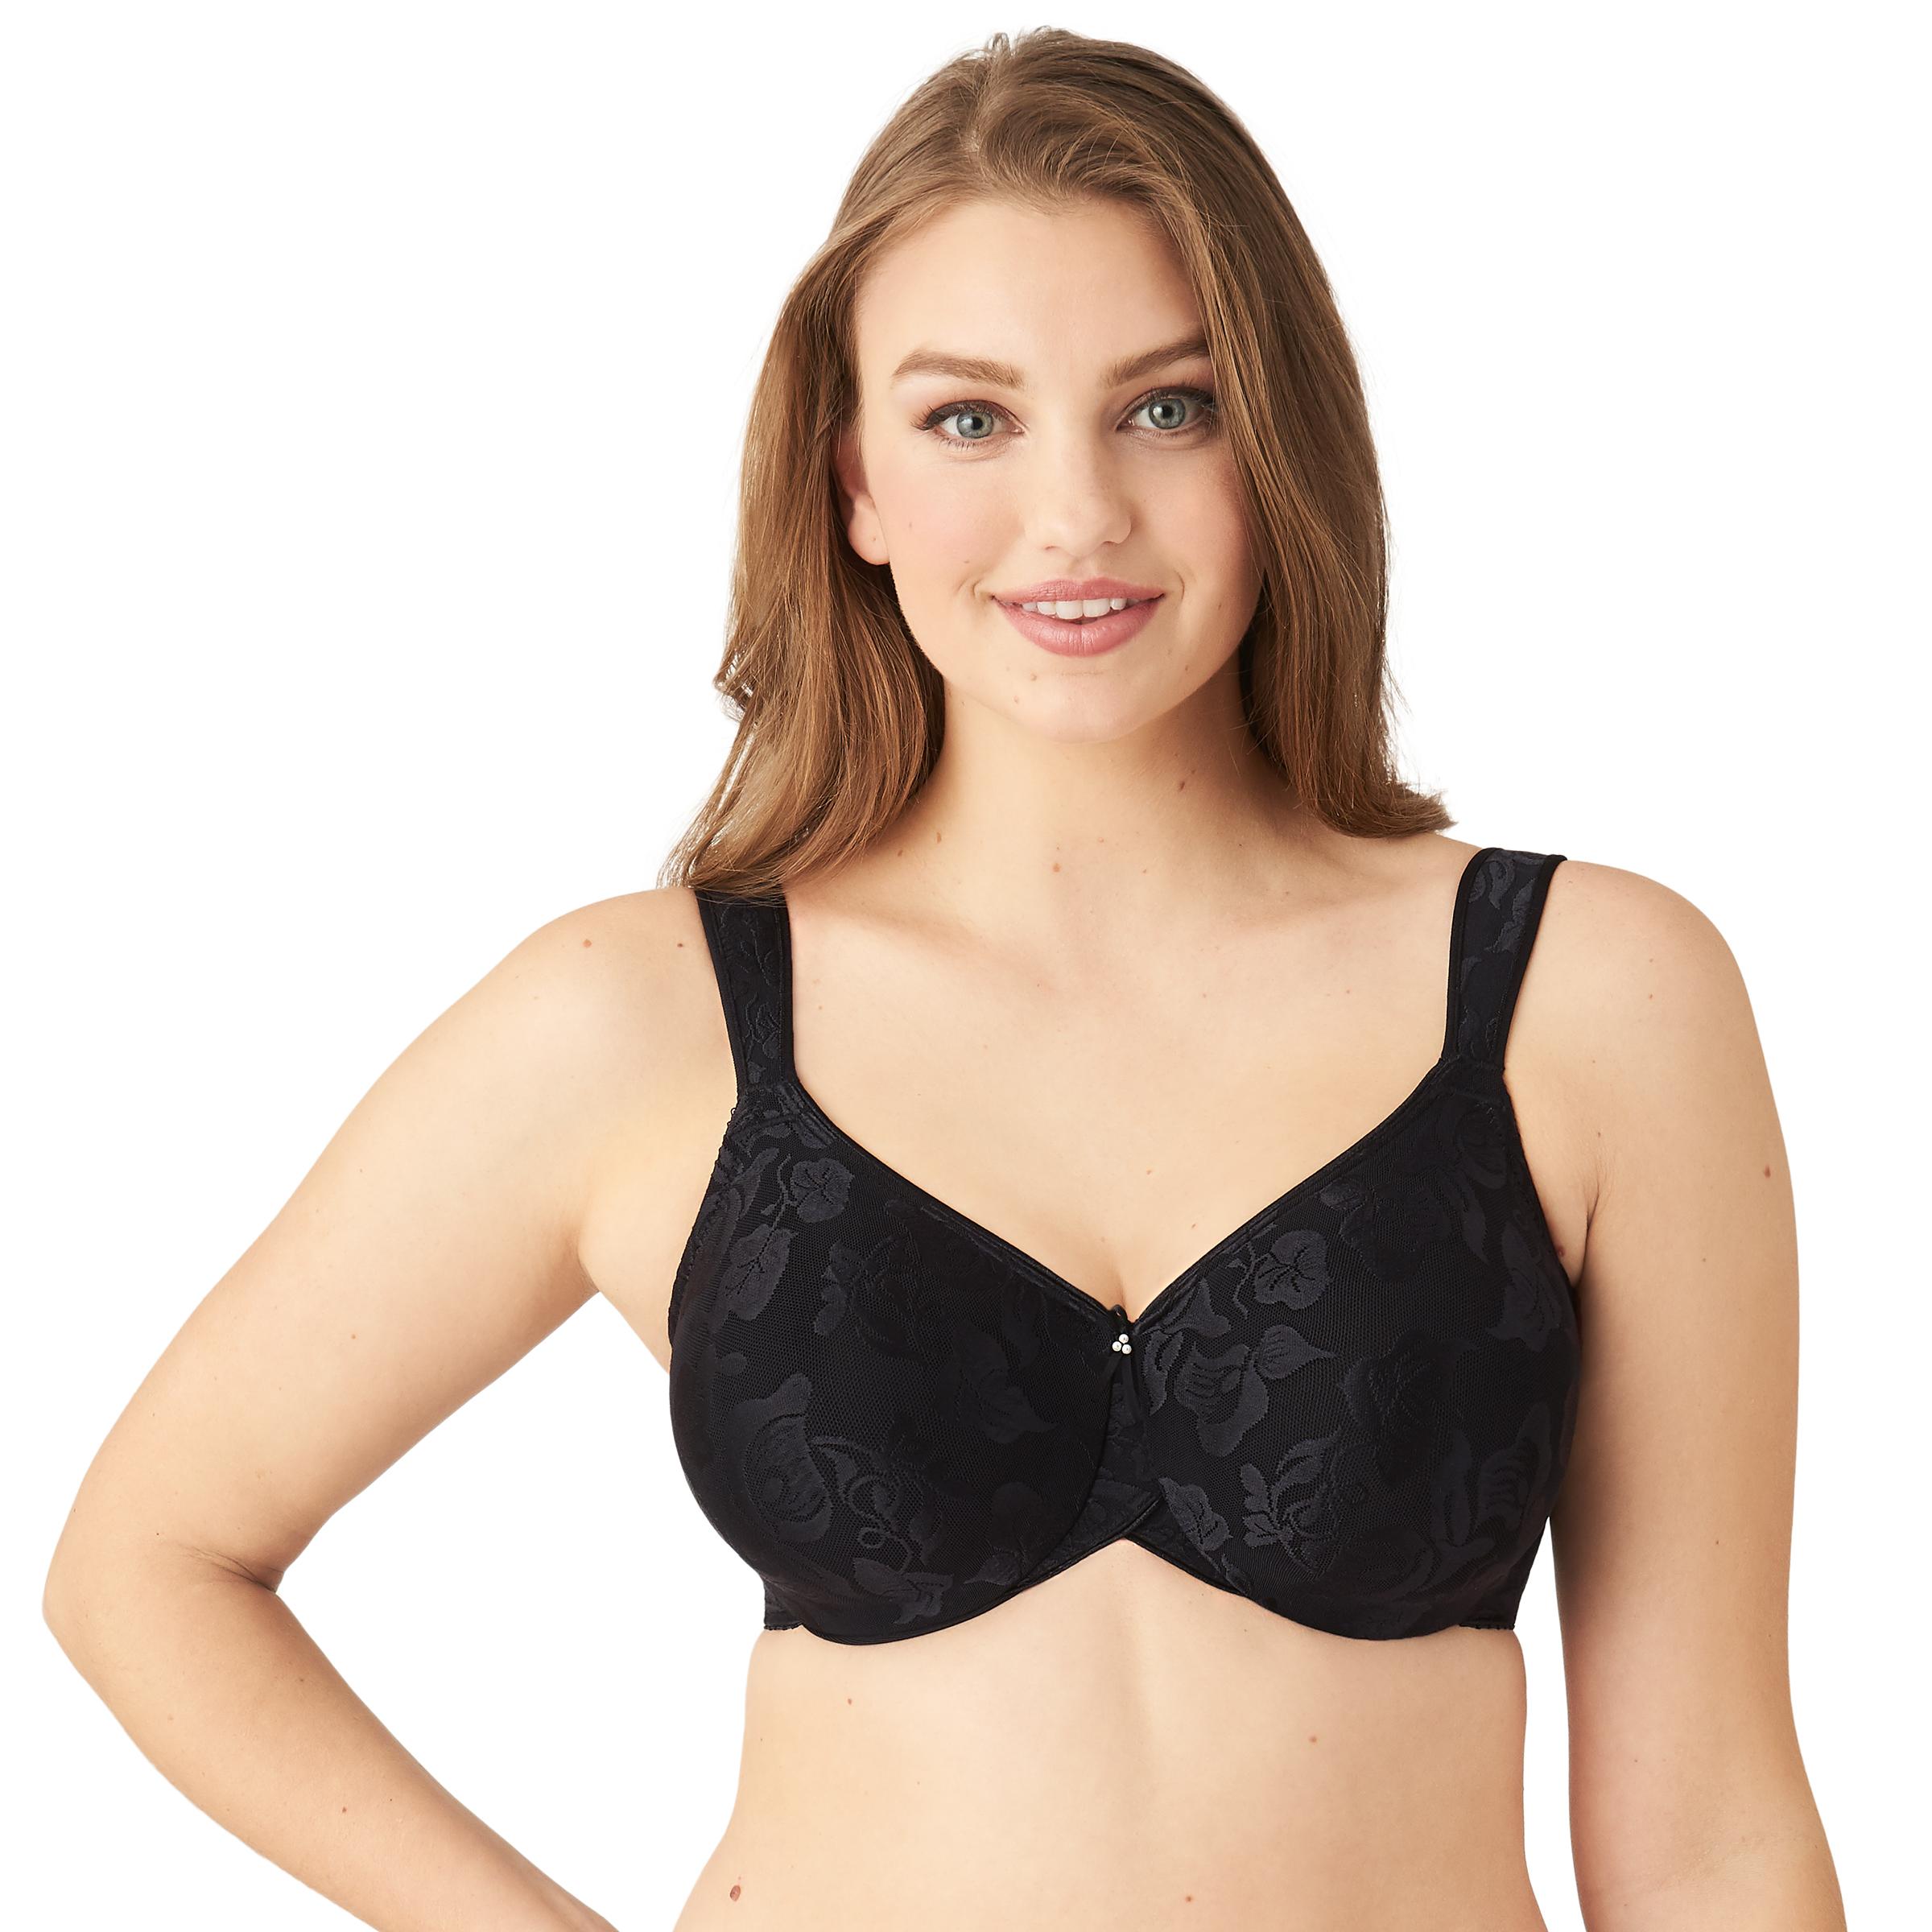 Baroque Lace Full Cup Bra - Black